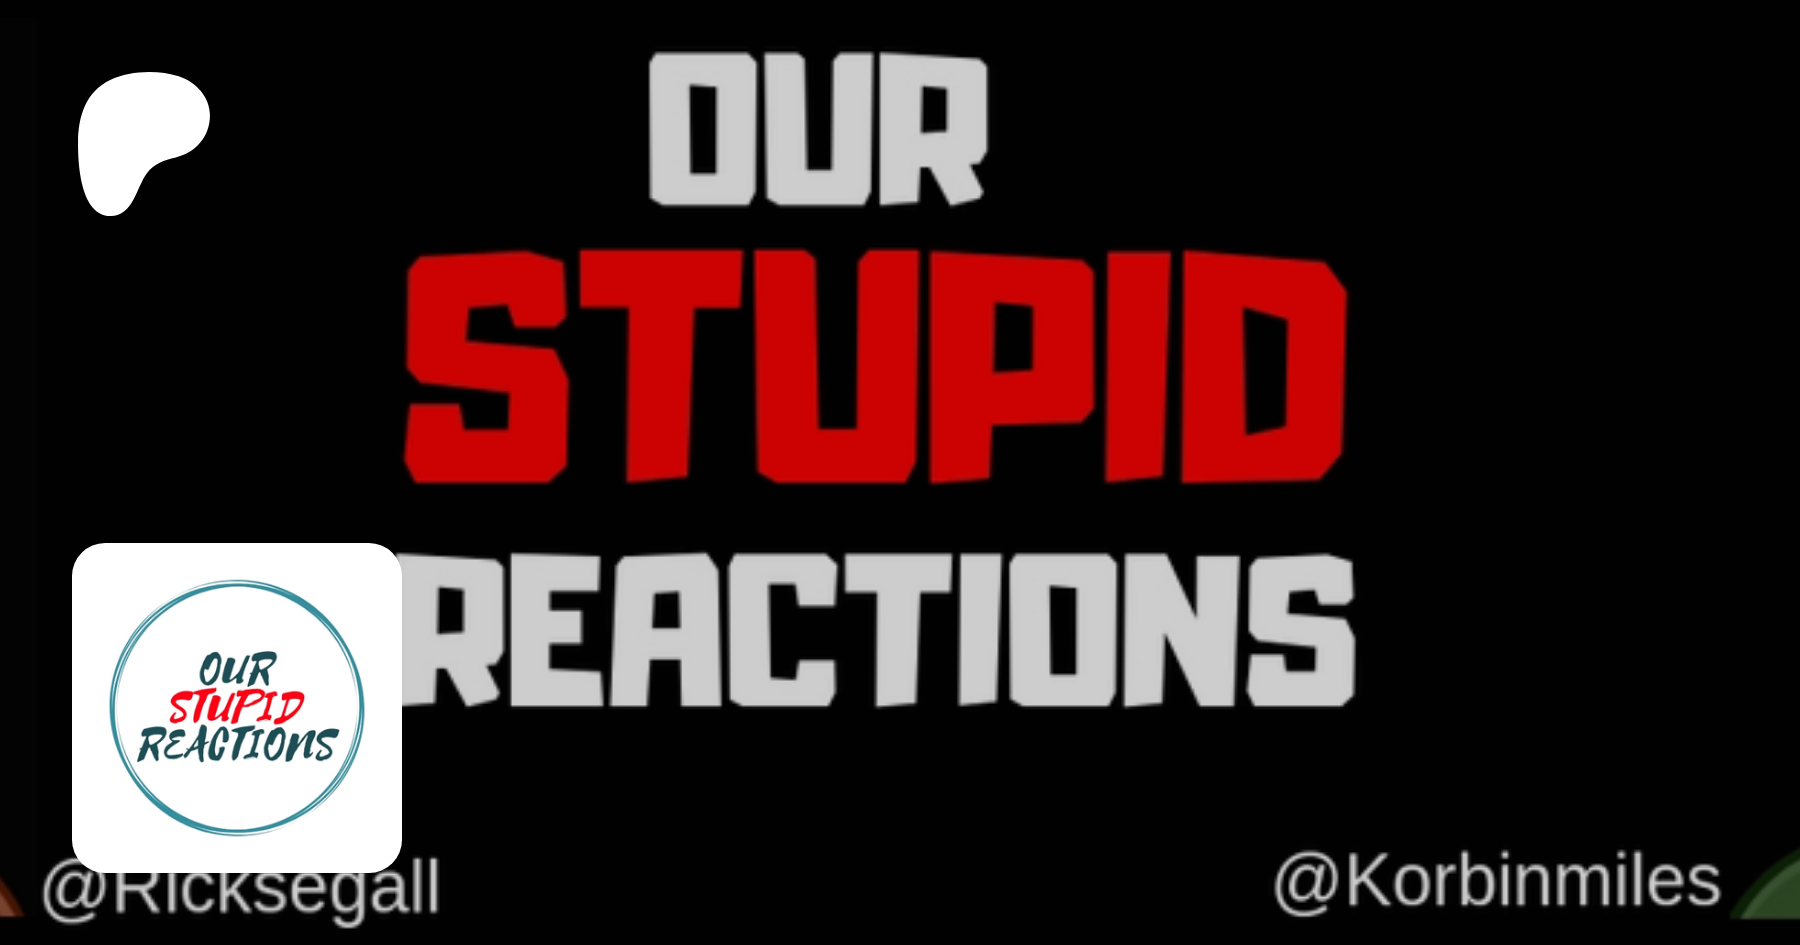 Our stupid reactions patreon